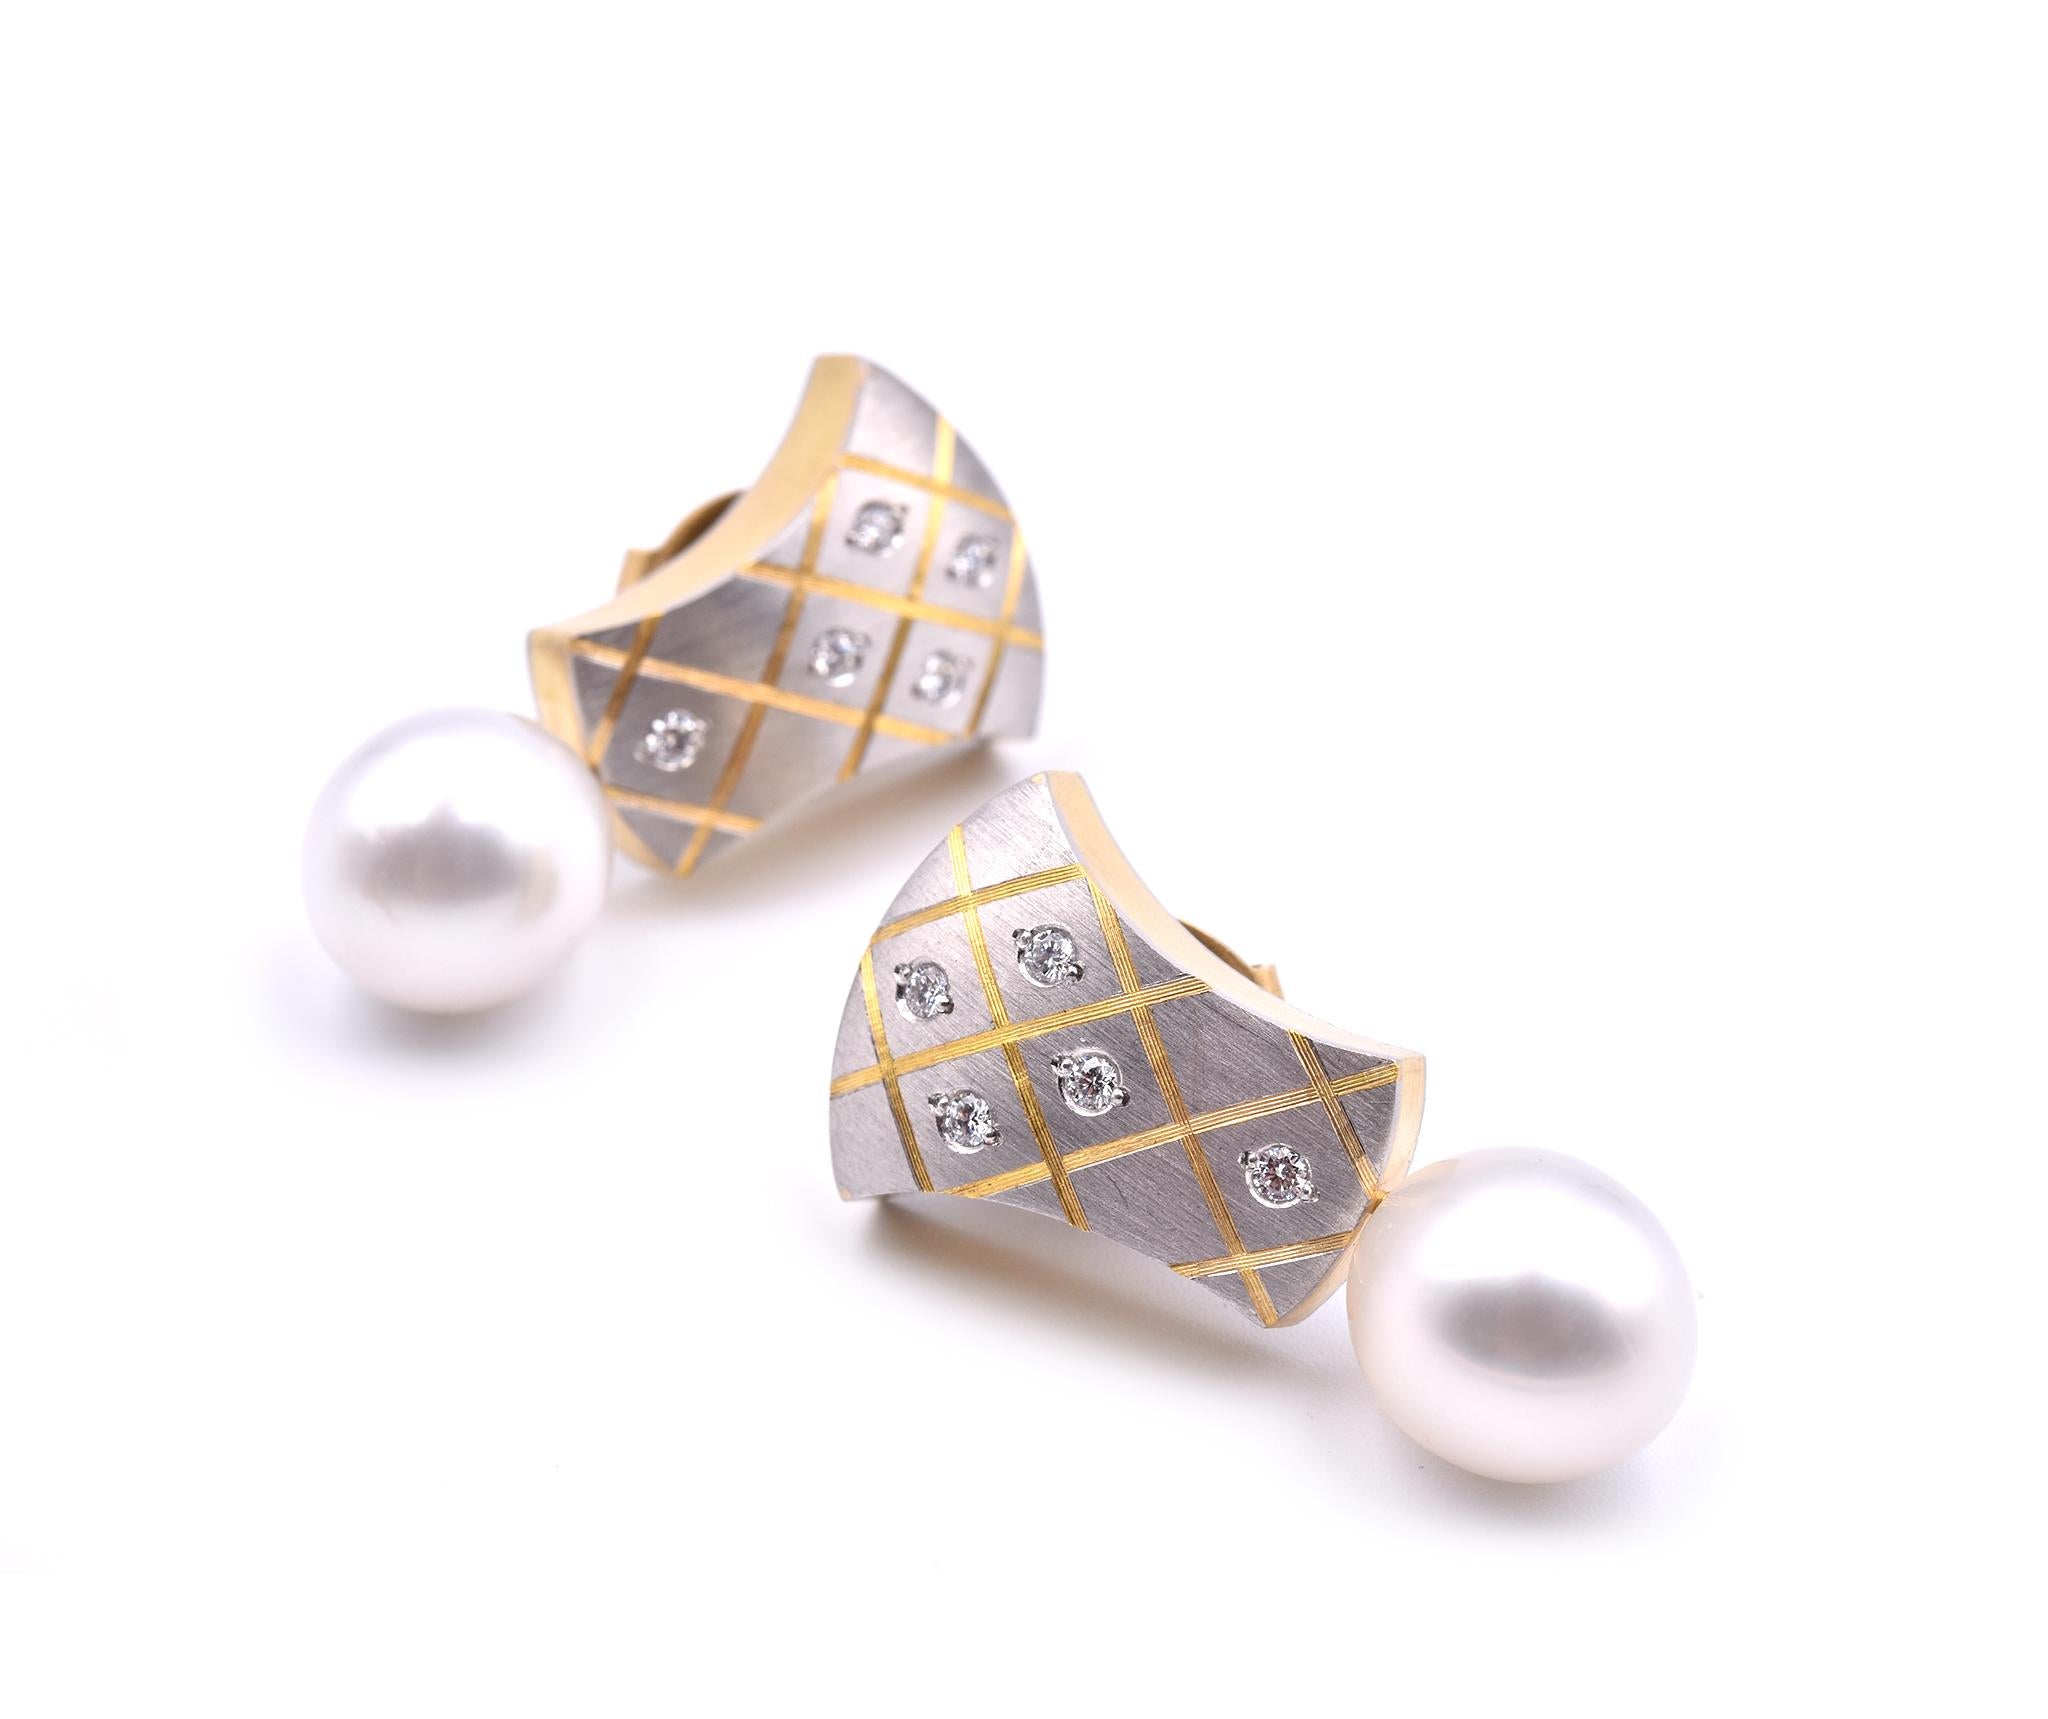 Designer: custom design
Material: 18k yellow gold and Platinum
South Sea Pearl: 2 south sea pearls 12.15mm in width
Diamonds: 10 round brilliant cut= 0.30cttw
Color: H
Clarity: SI1
Fastenings: post with friction back
Dimensions: each earring is